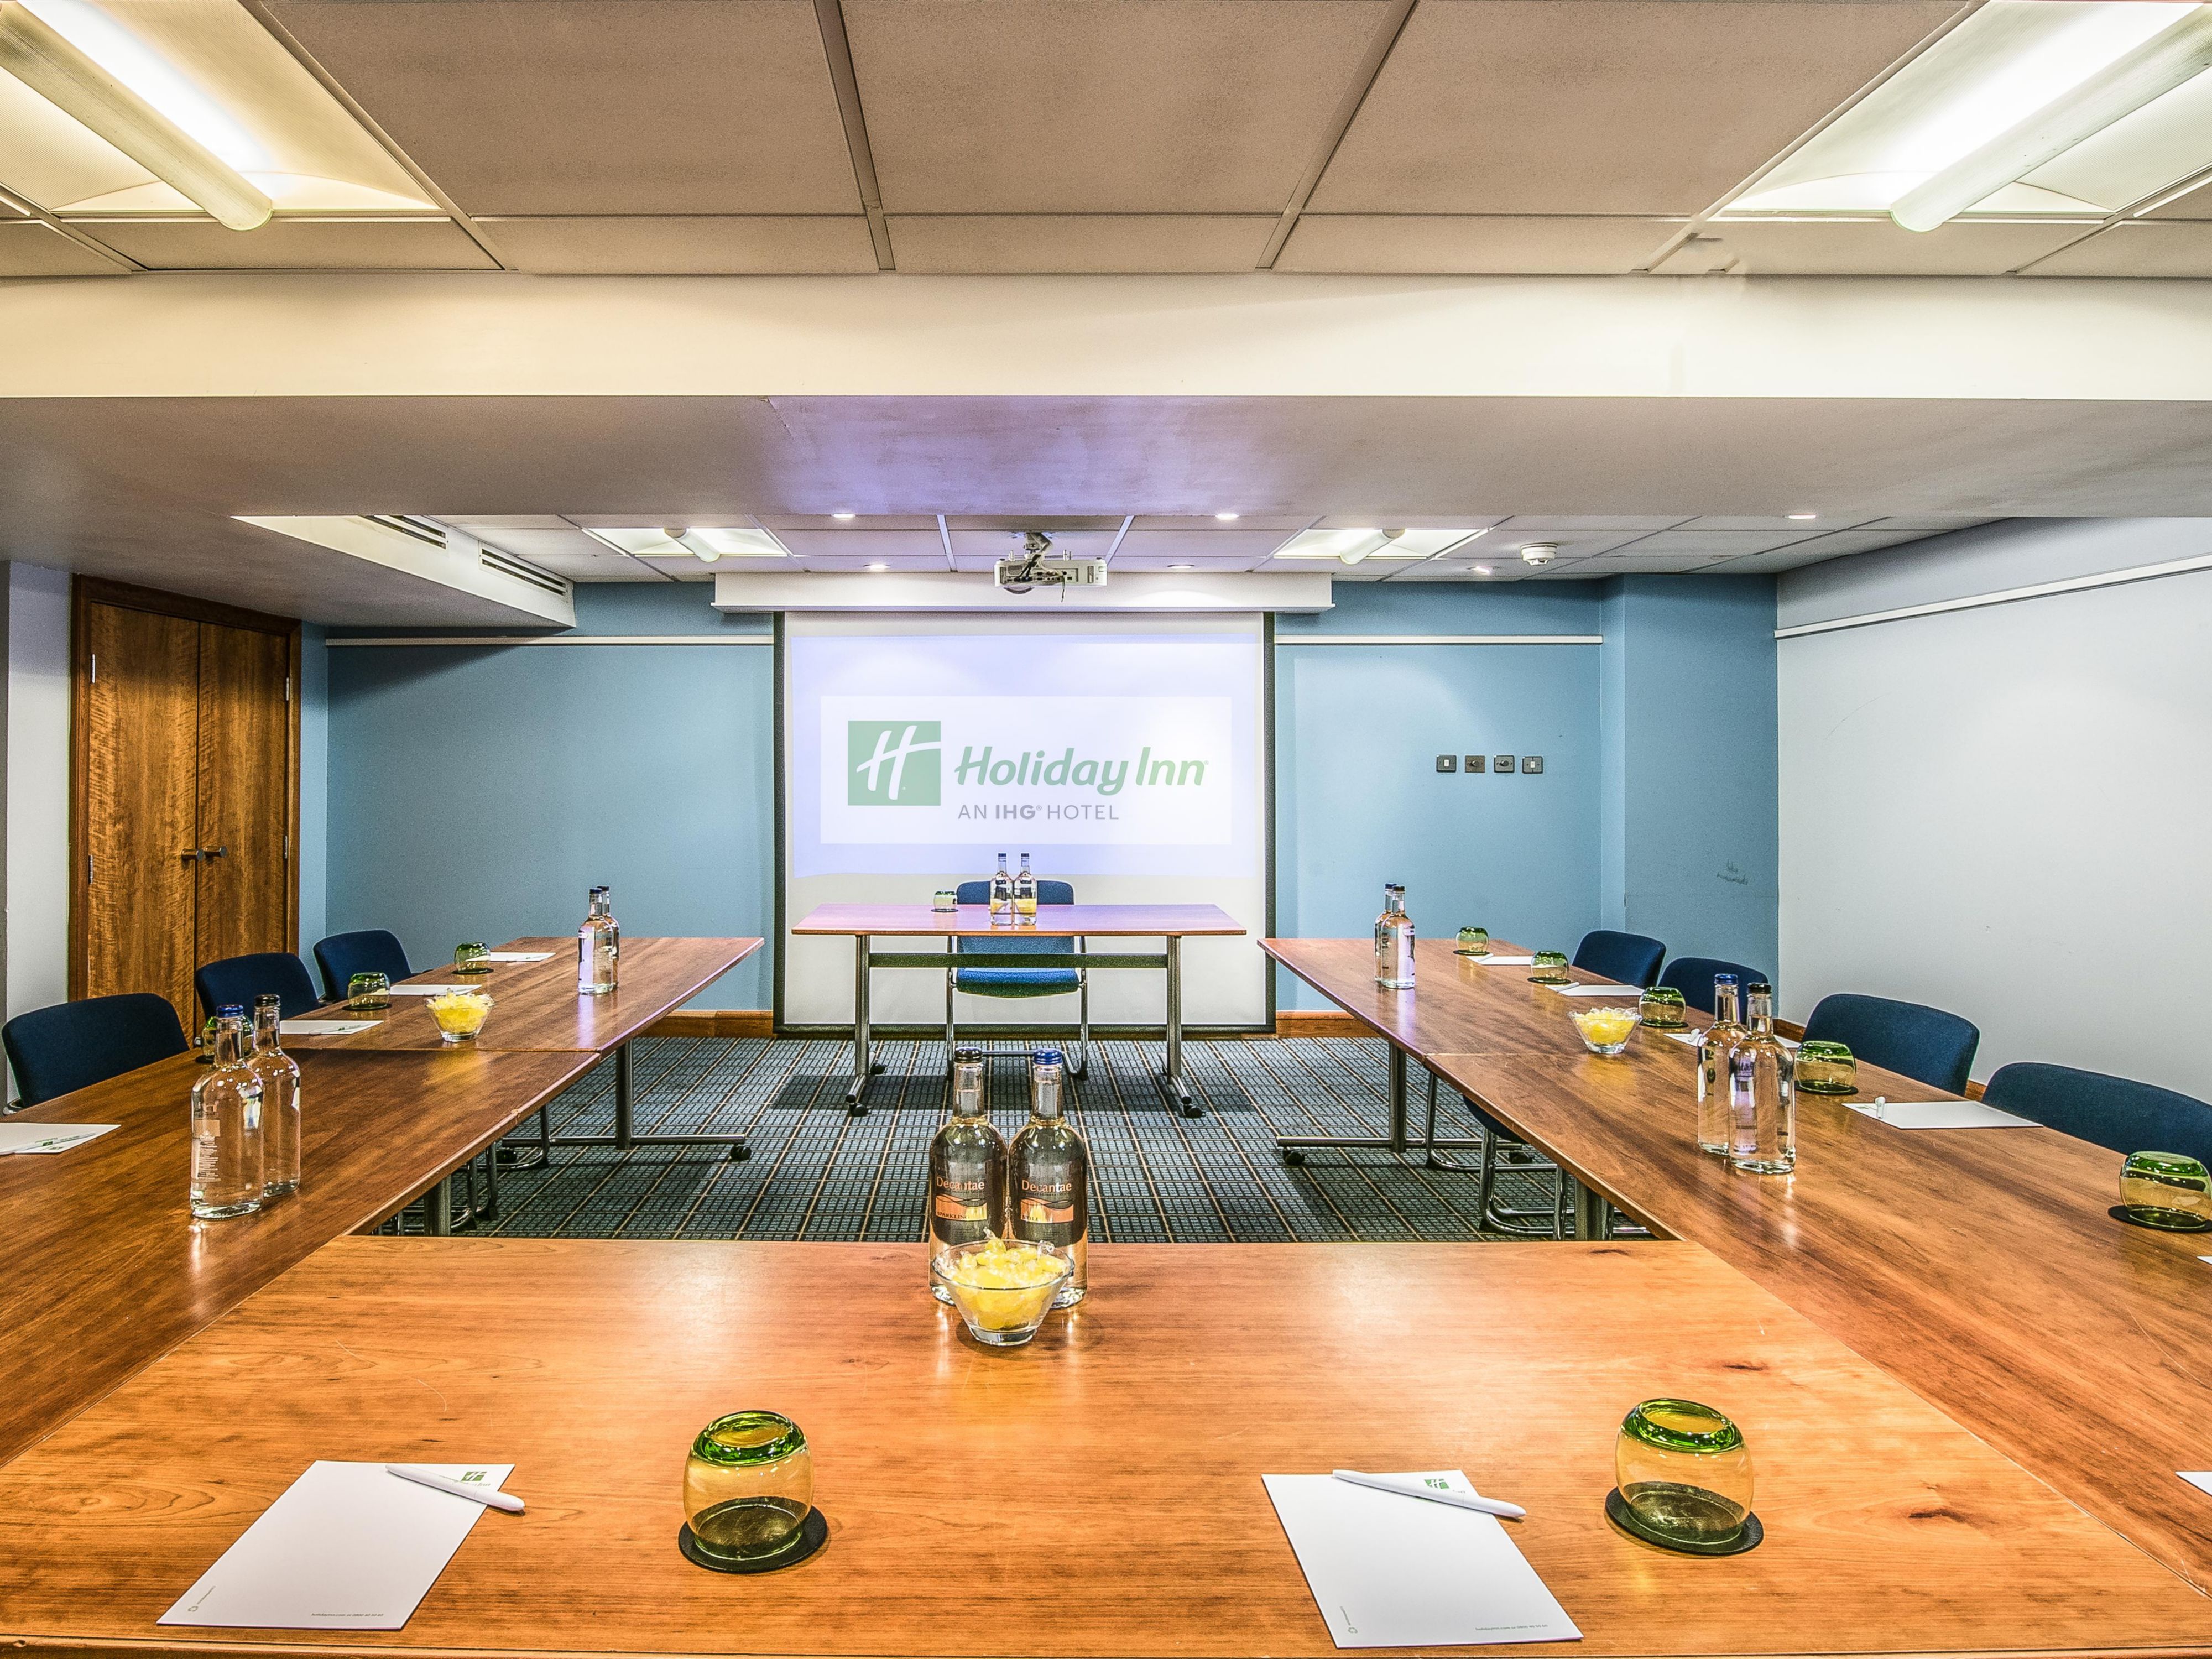 Host meetings or events for up to 120 guests in our fully equipped, versatile meeting rooms in a purpose built Academy Conference Centre.  There’s also a 15 acre field, perfect for outdoor events and team building activities. 